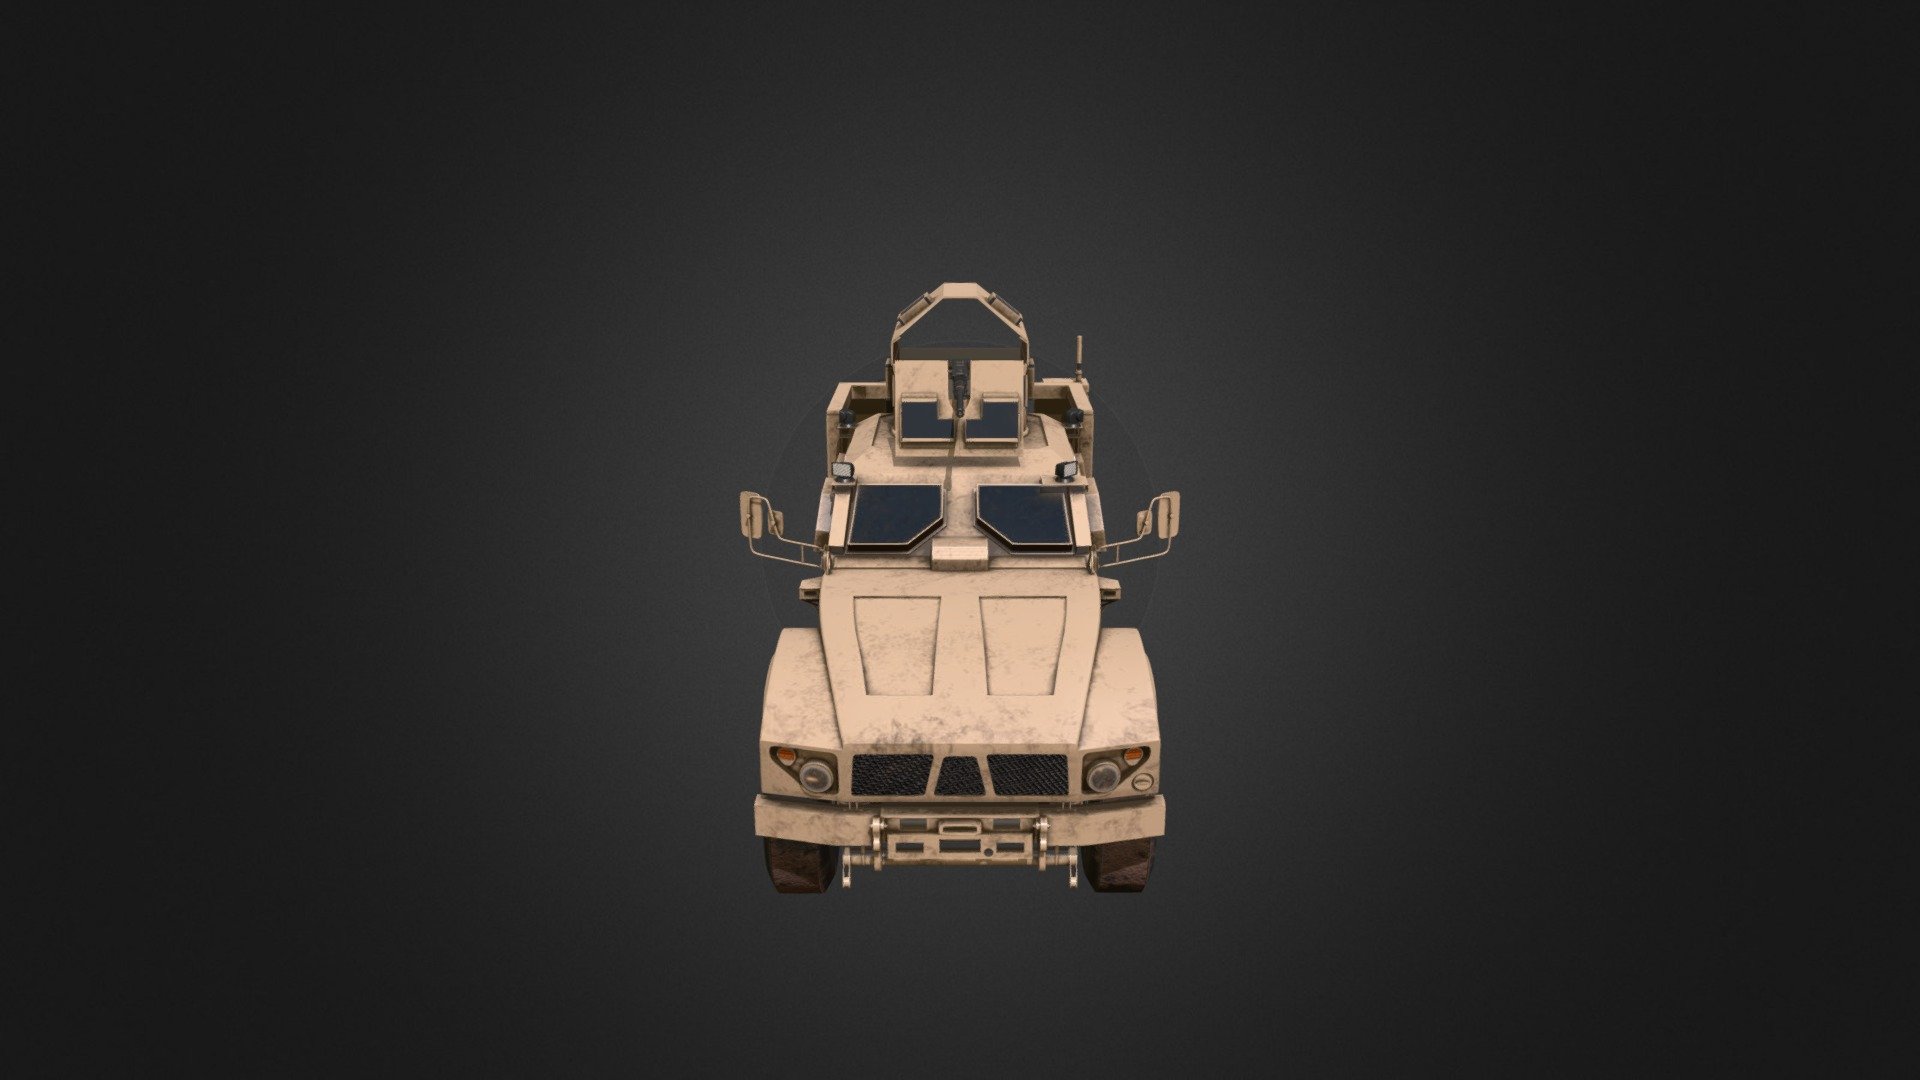 Following a udemy tutorial - Blender Game Vehicle Creation by Darrin Lile. I created this Army vehicle using Blender and substance painter. This is my first vehicle model.

Kindly provide feedback.

Thank you 3d model